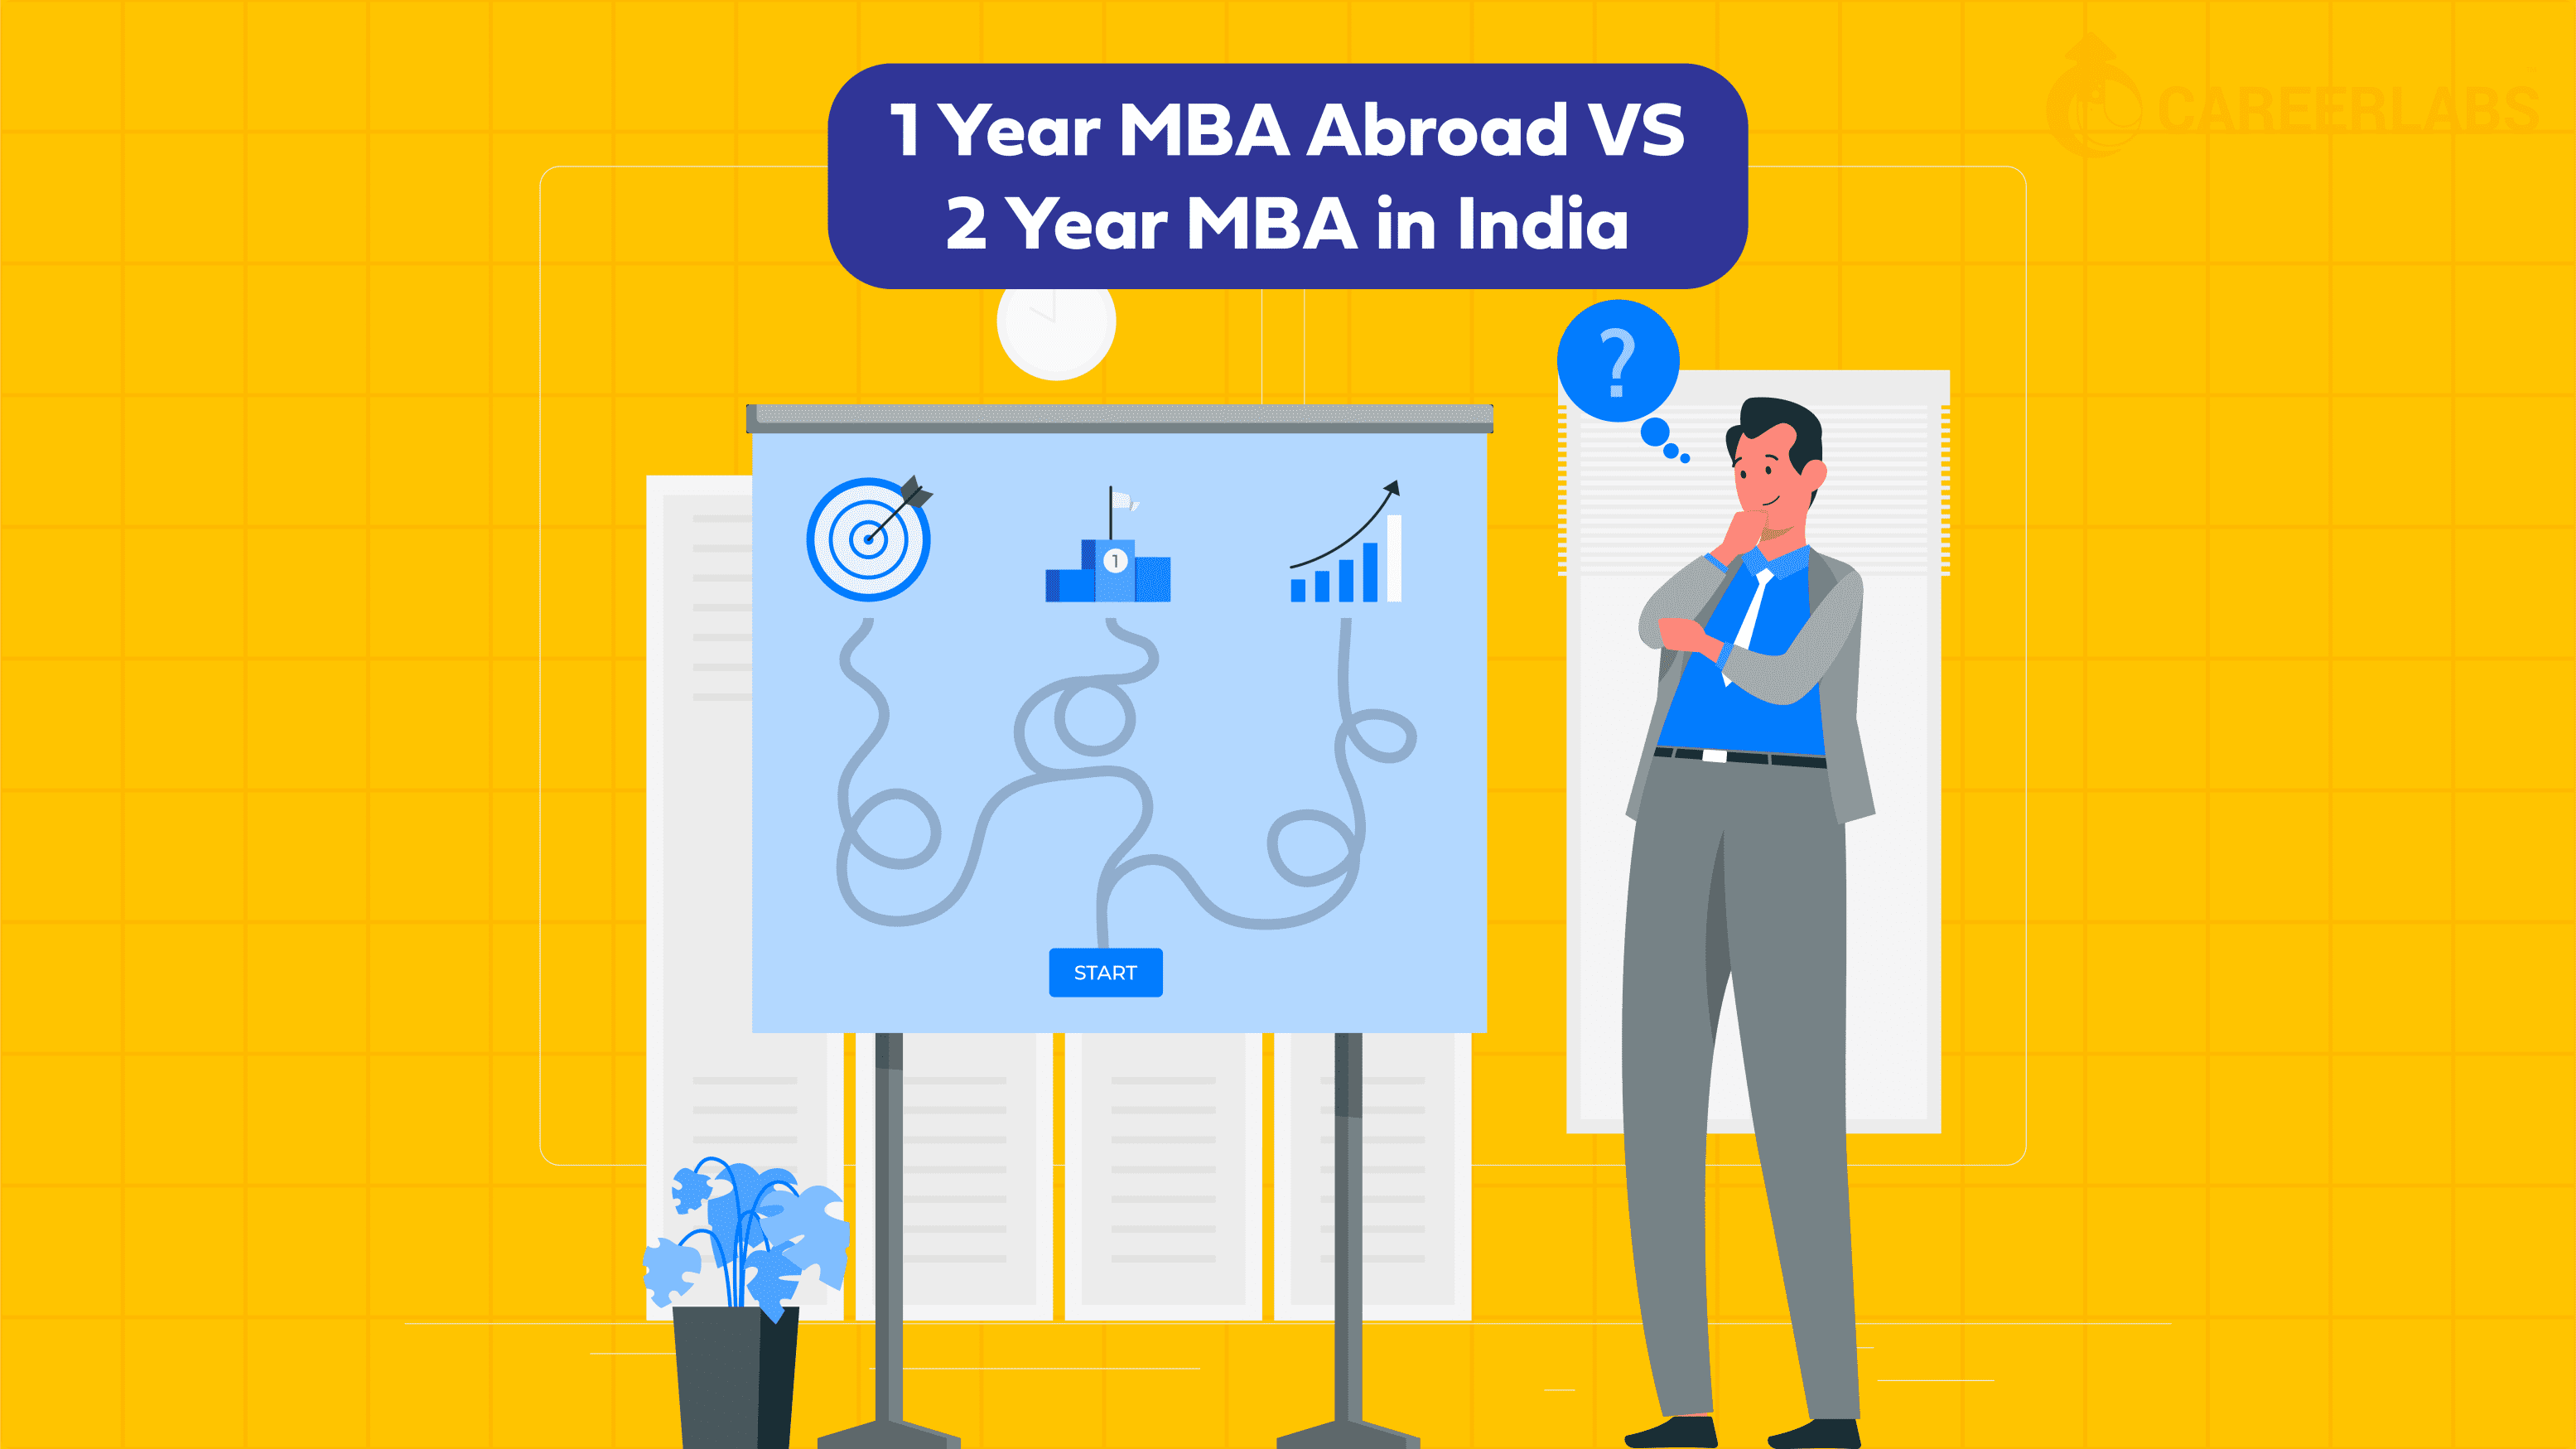 1 Year MBA Abroad vs 2 Year MBA in India